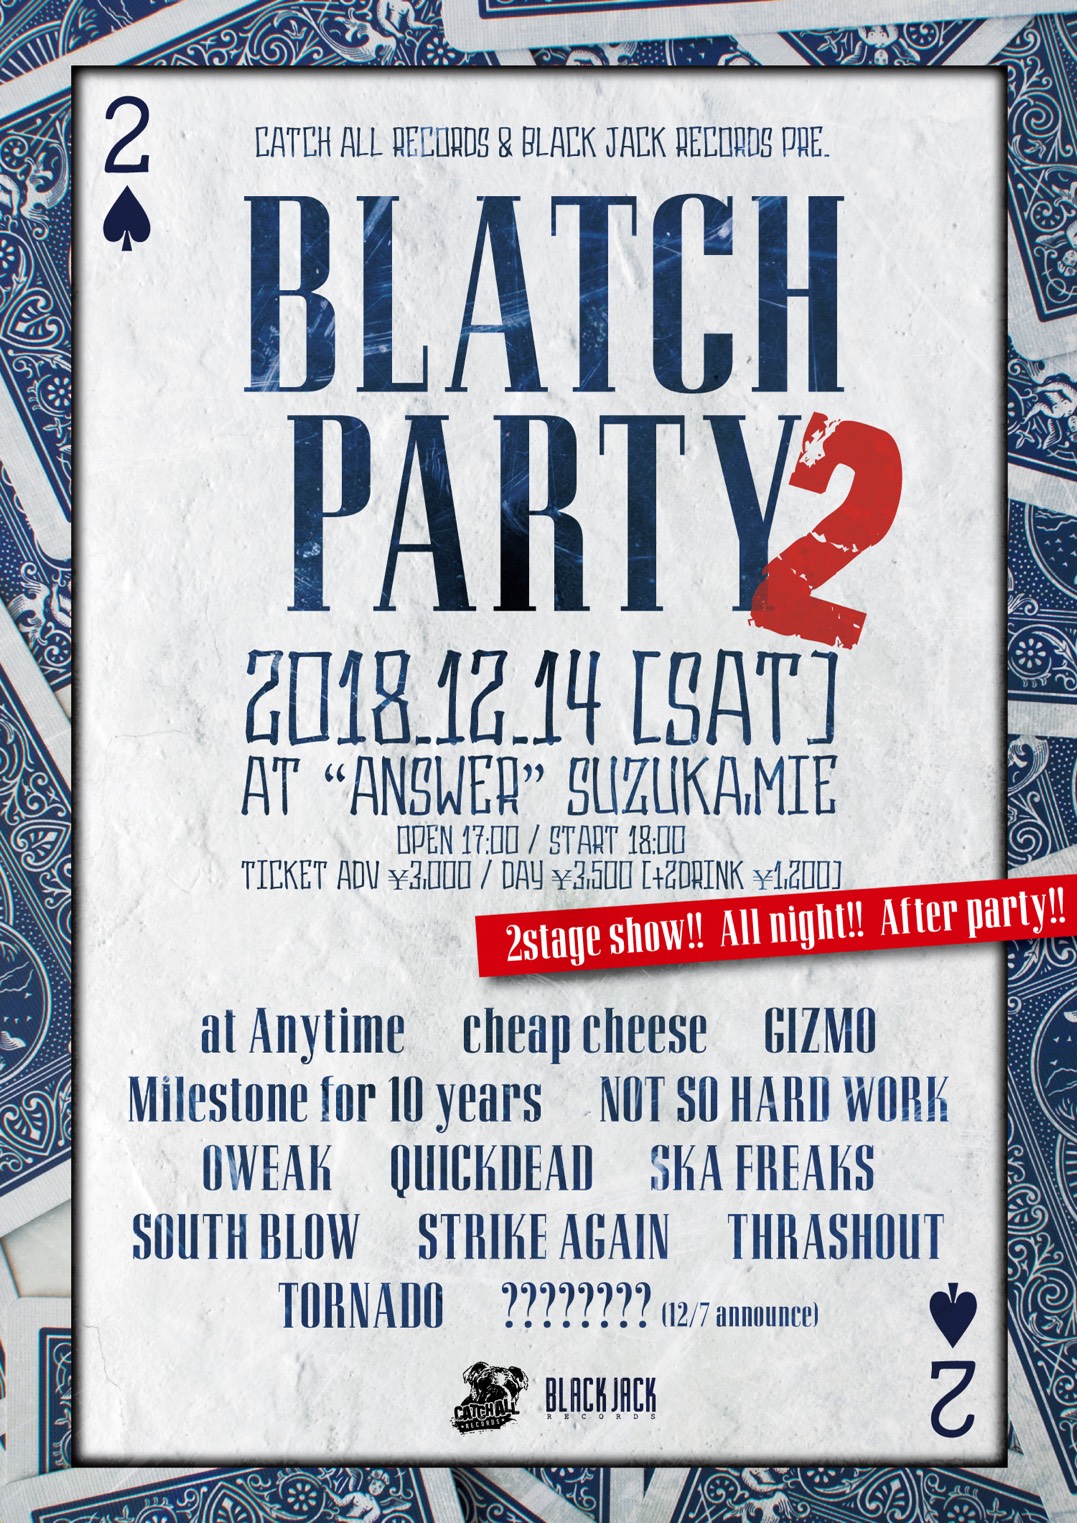 BLATCH PARTY 2